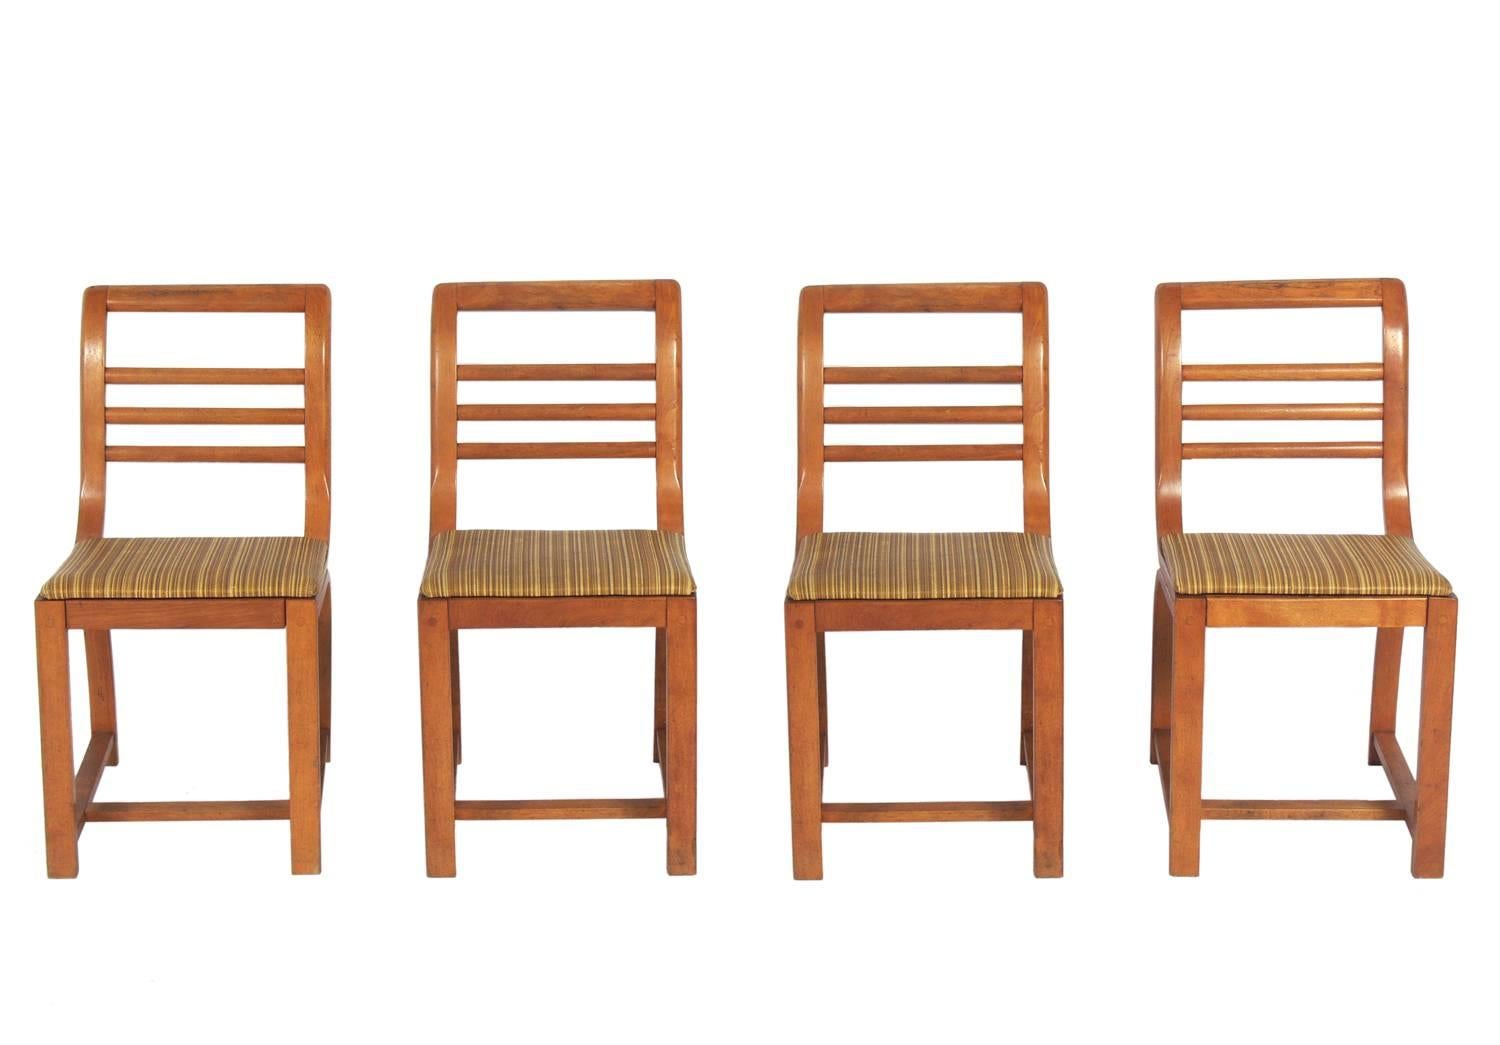 Set of four curvaceous Art Deco dining chairs by Gilbert Rohde for Heywood Wakefield, American, circa 1930s. They are currently being refinished and reupholstered and can be completed in your choice of finish color and reupholstered in your fabric.